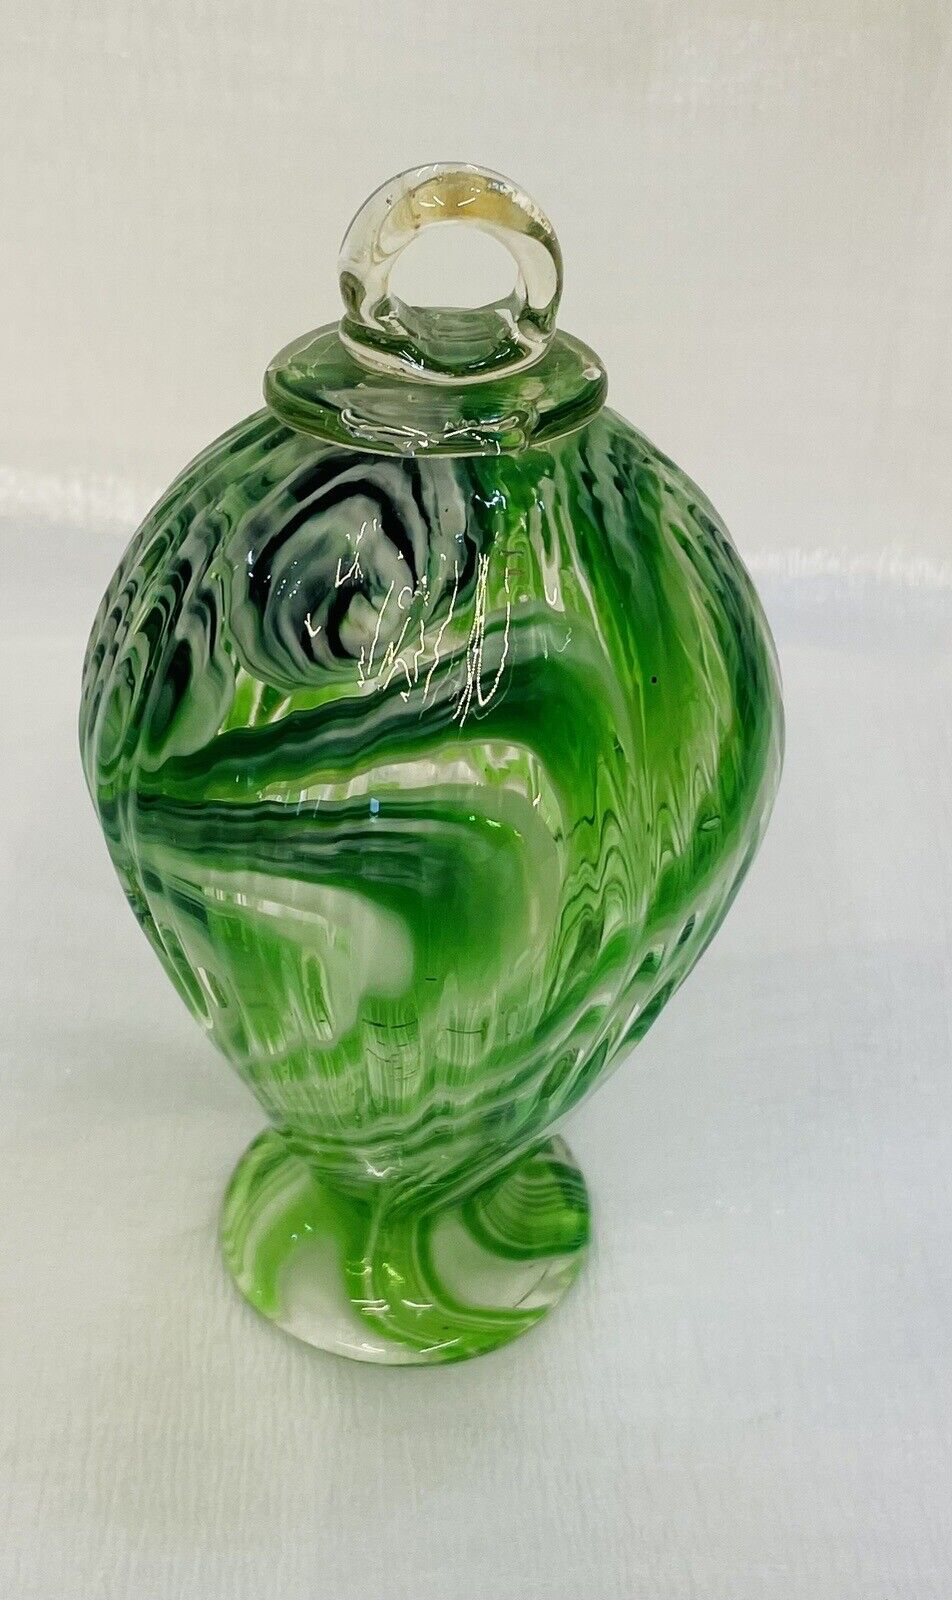 Large Hand Blown Glass Christmas Ornament, Green and White